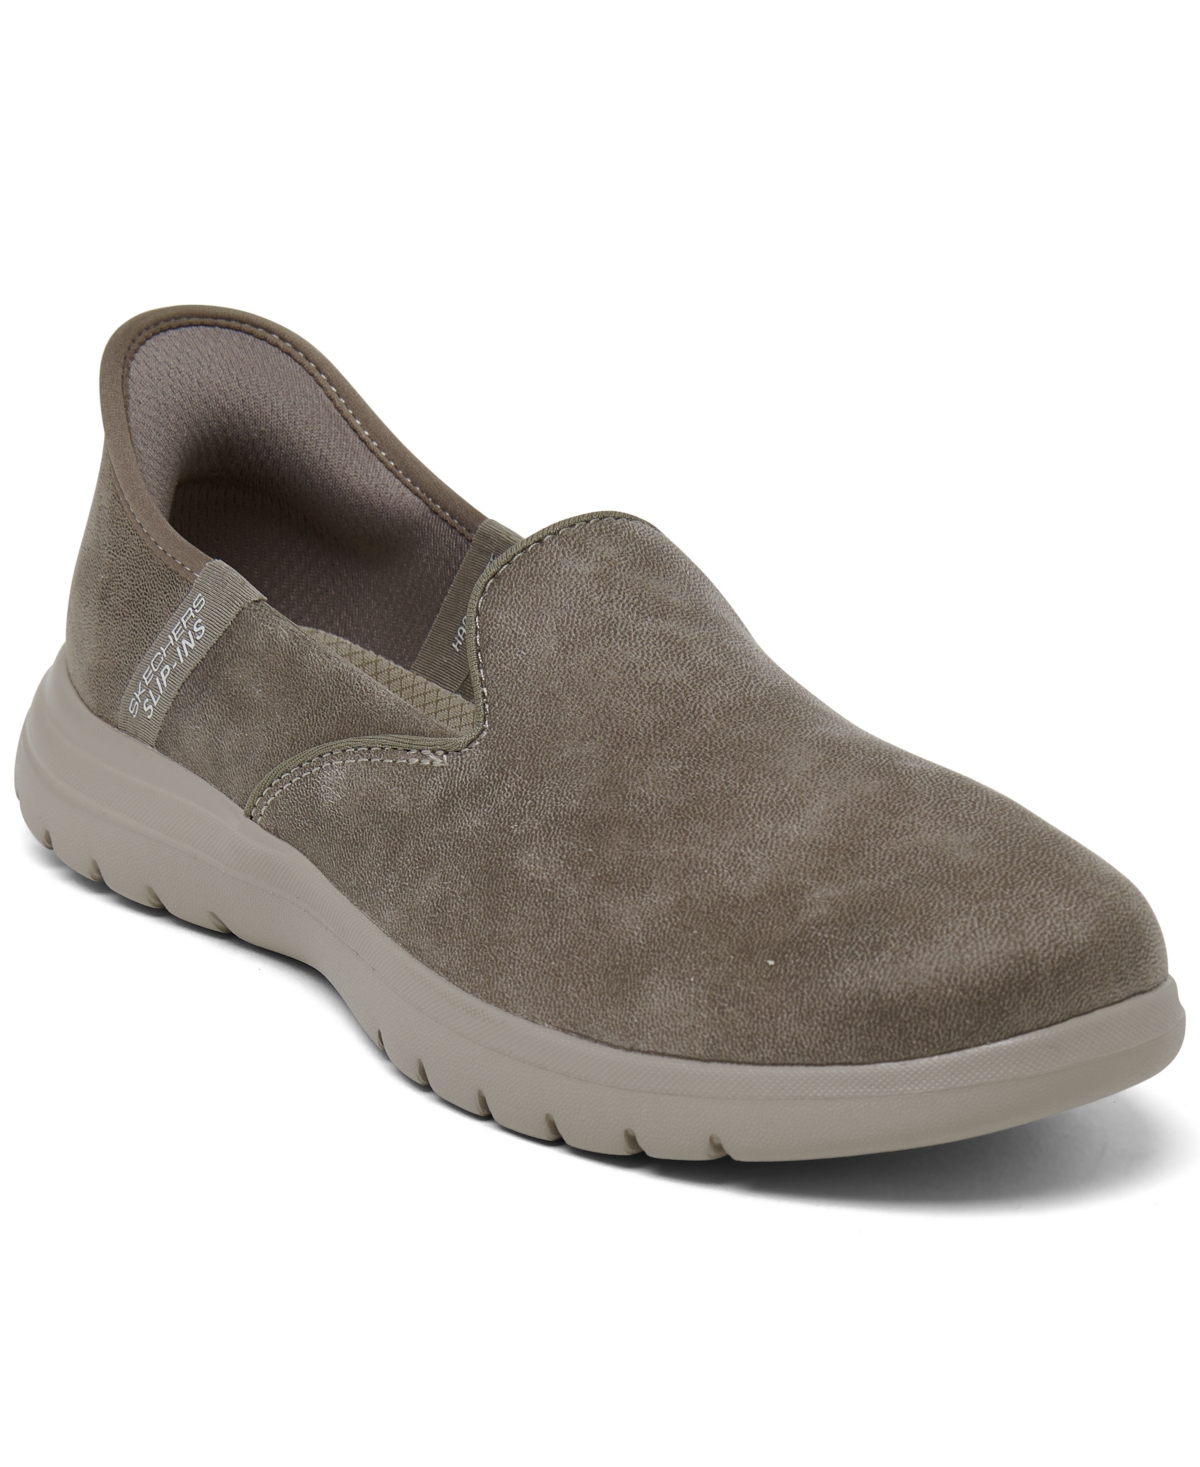 Skechers Women's Slip-Ins On-the-go Flex - Captivating Slip-On Walking  Sneakers from Finish Line - Taupe